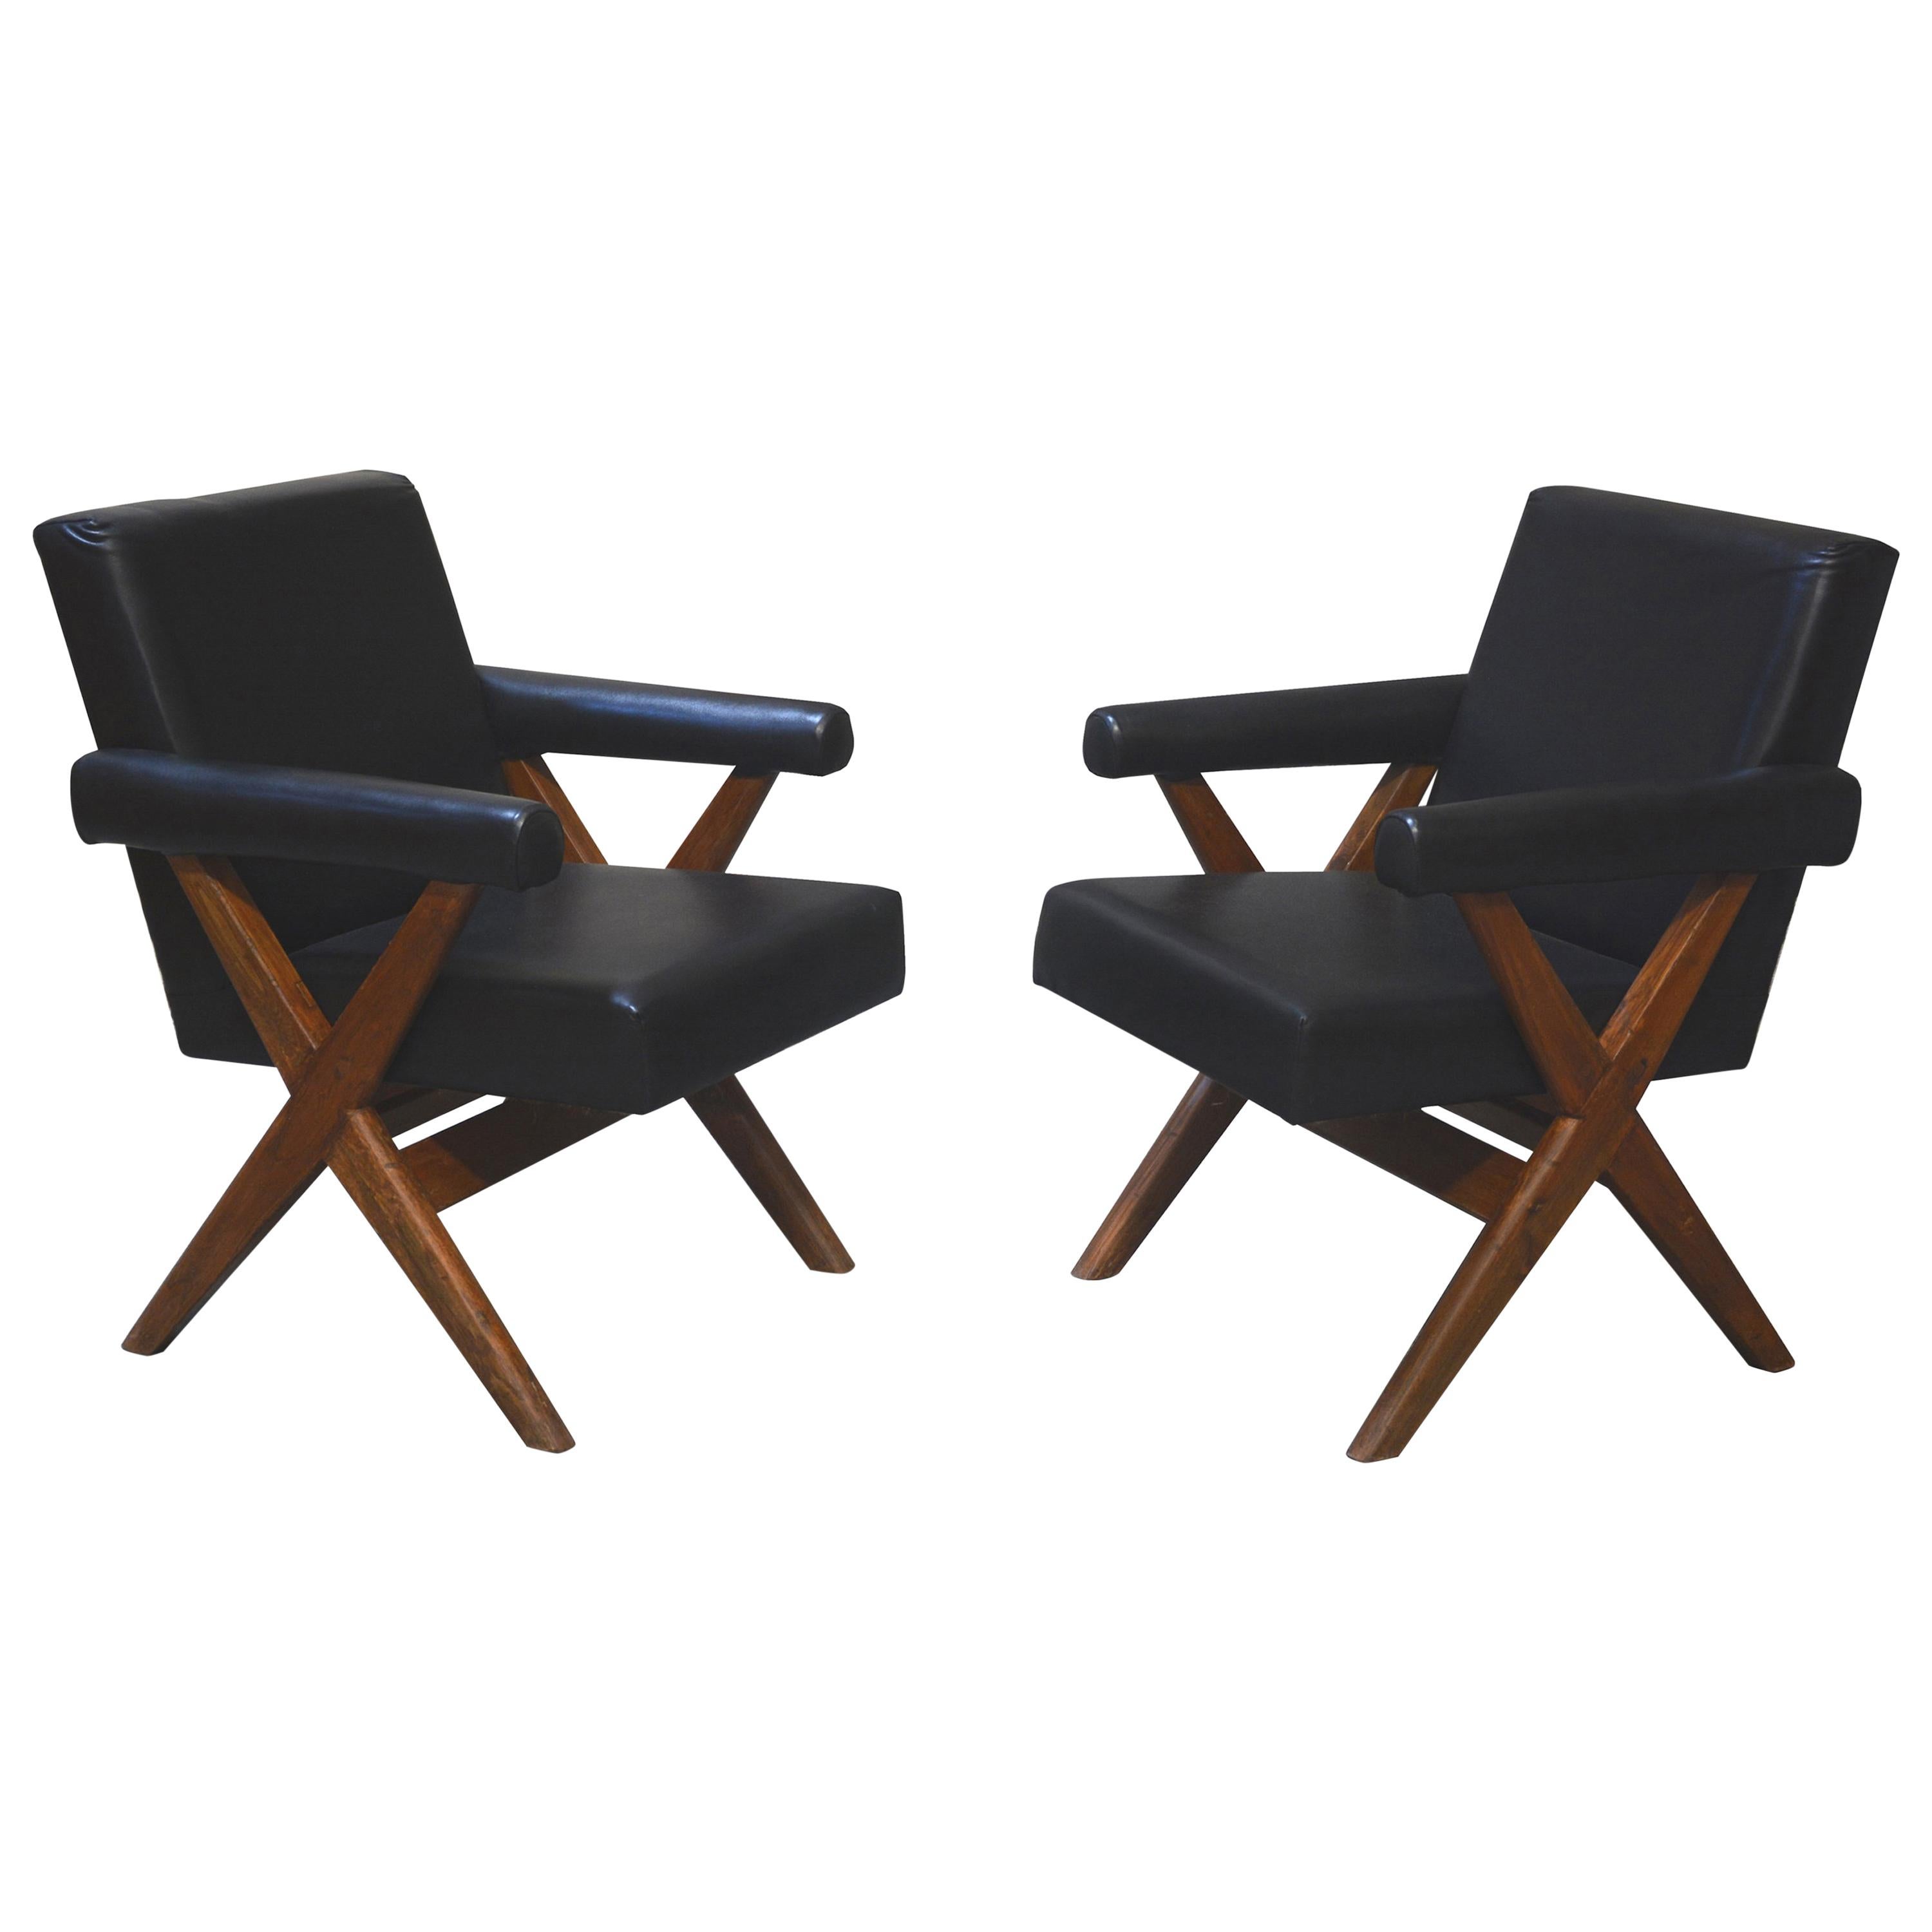 Exceptional pair of X-Leg Armchairs by Pierre Jeanneret im Angebot